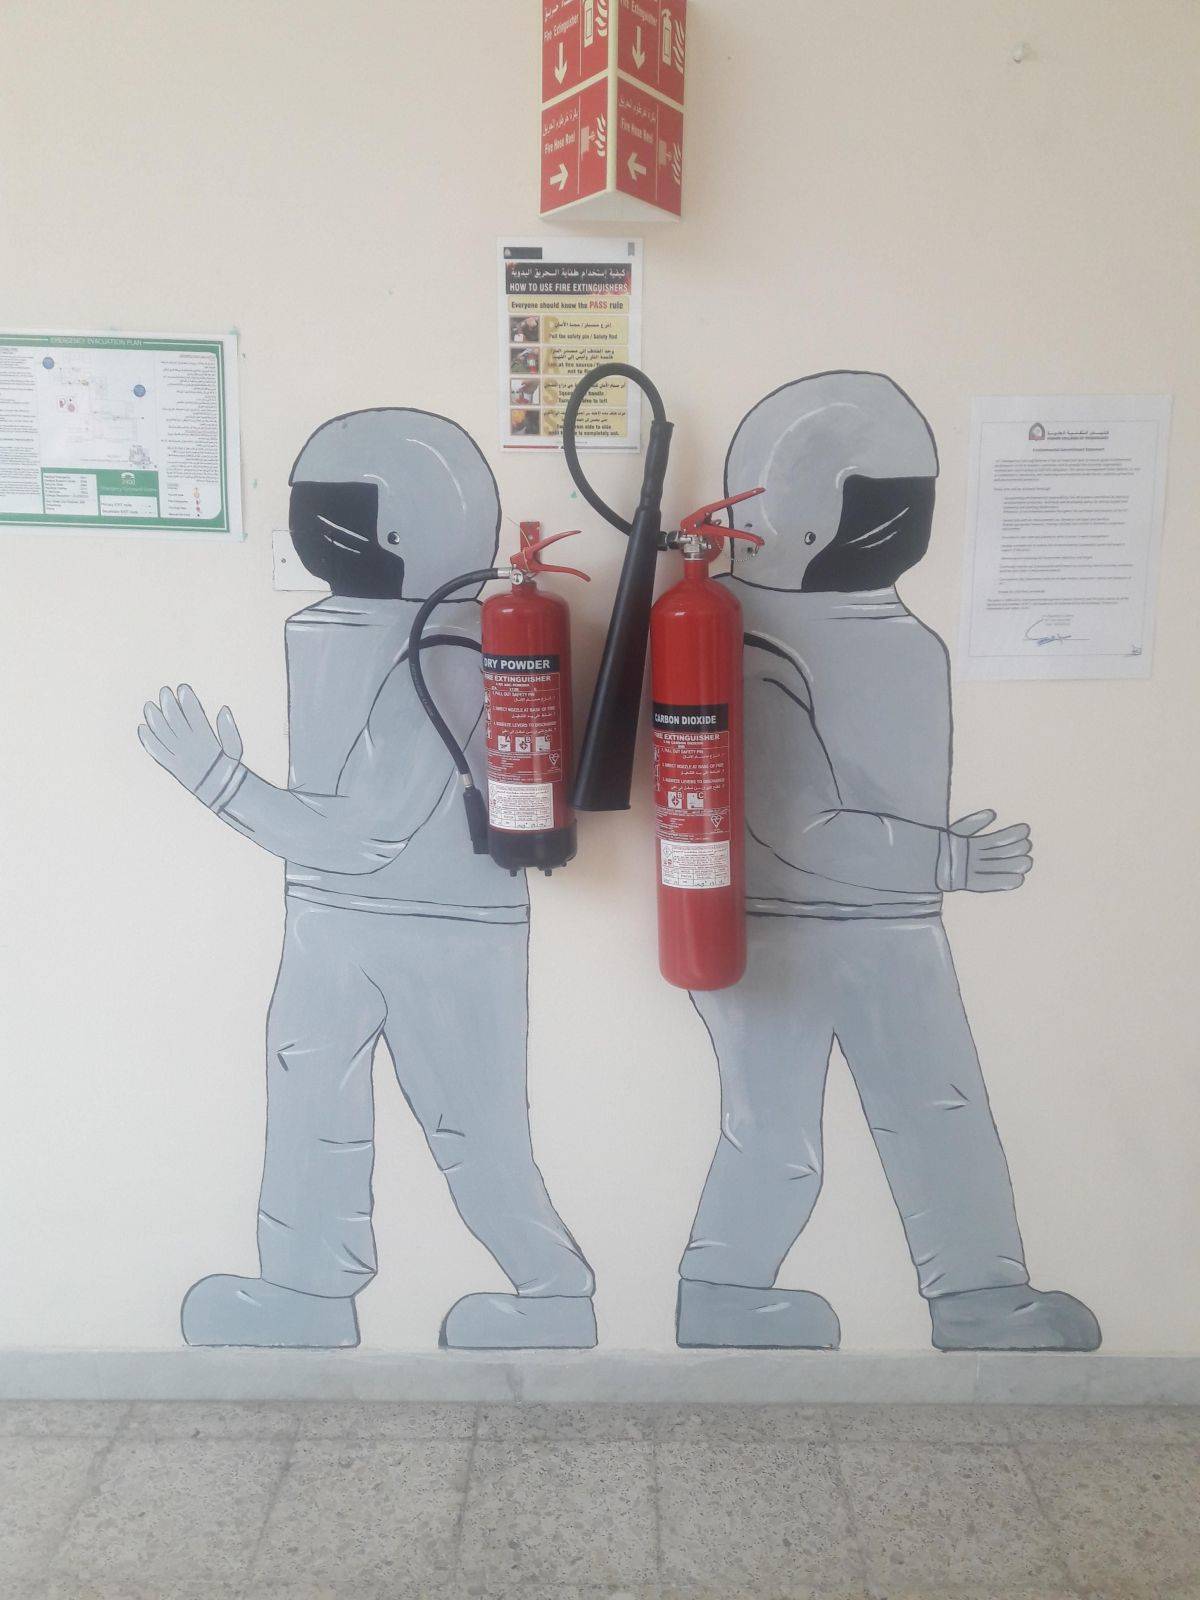 random pic How To Use Fire Extinguishers Everyone should have the Pass rule P od Ory Powder Se Extinguisher Creat Carbon Dioxide